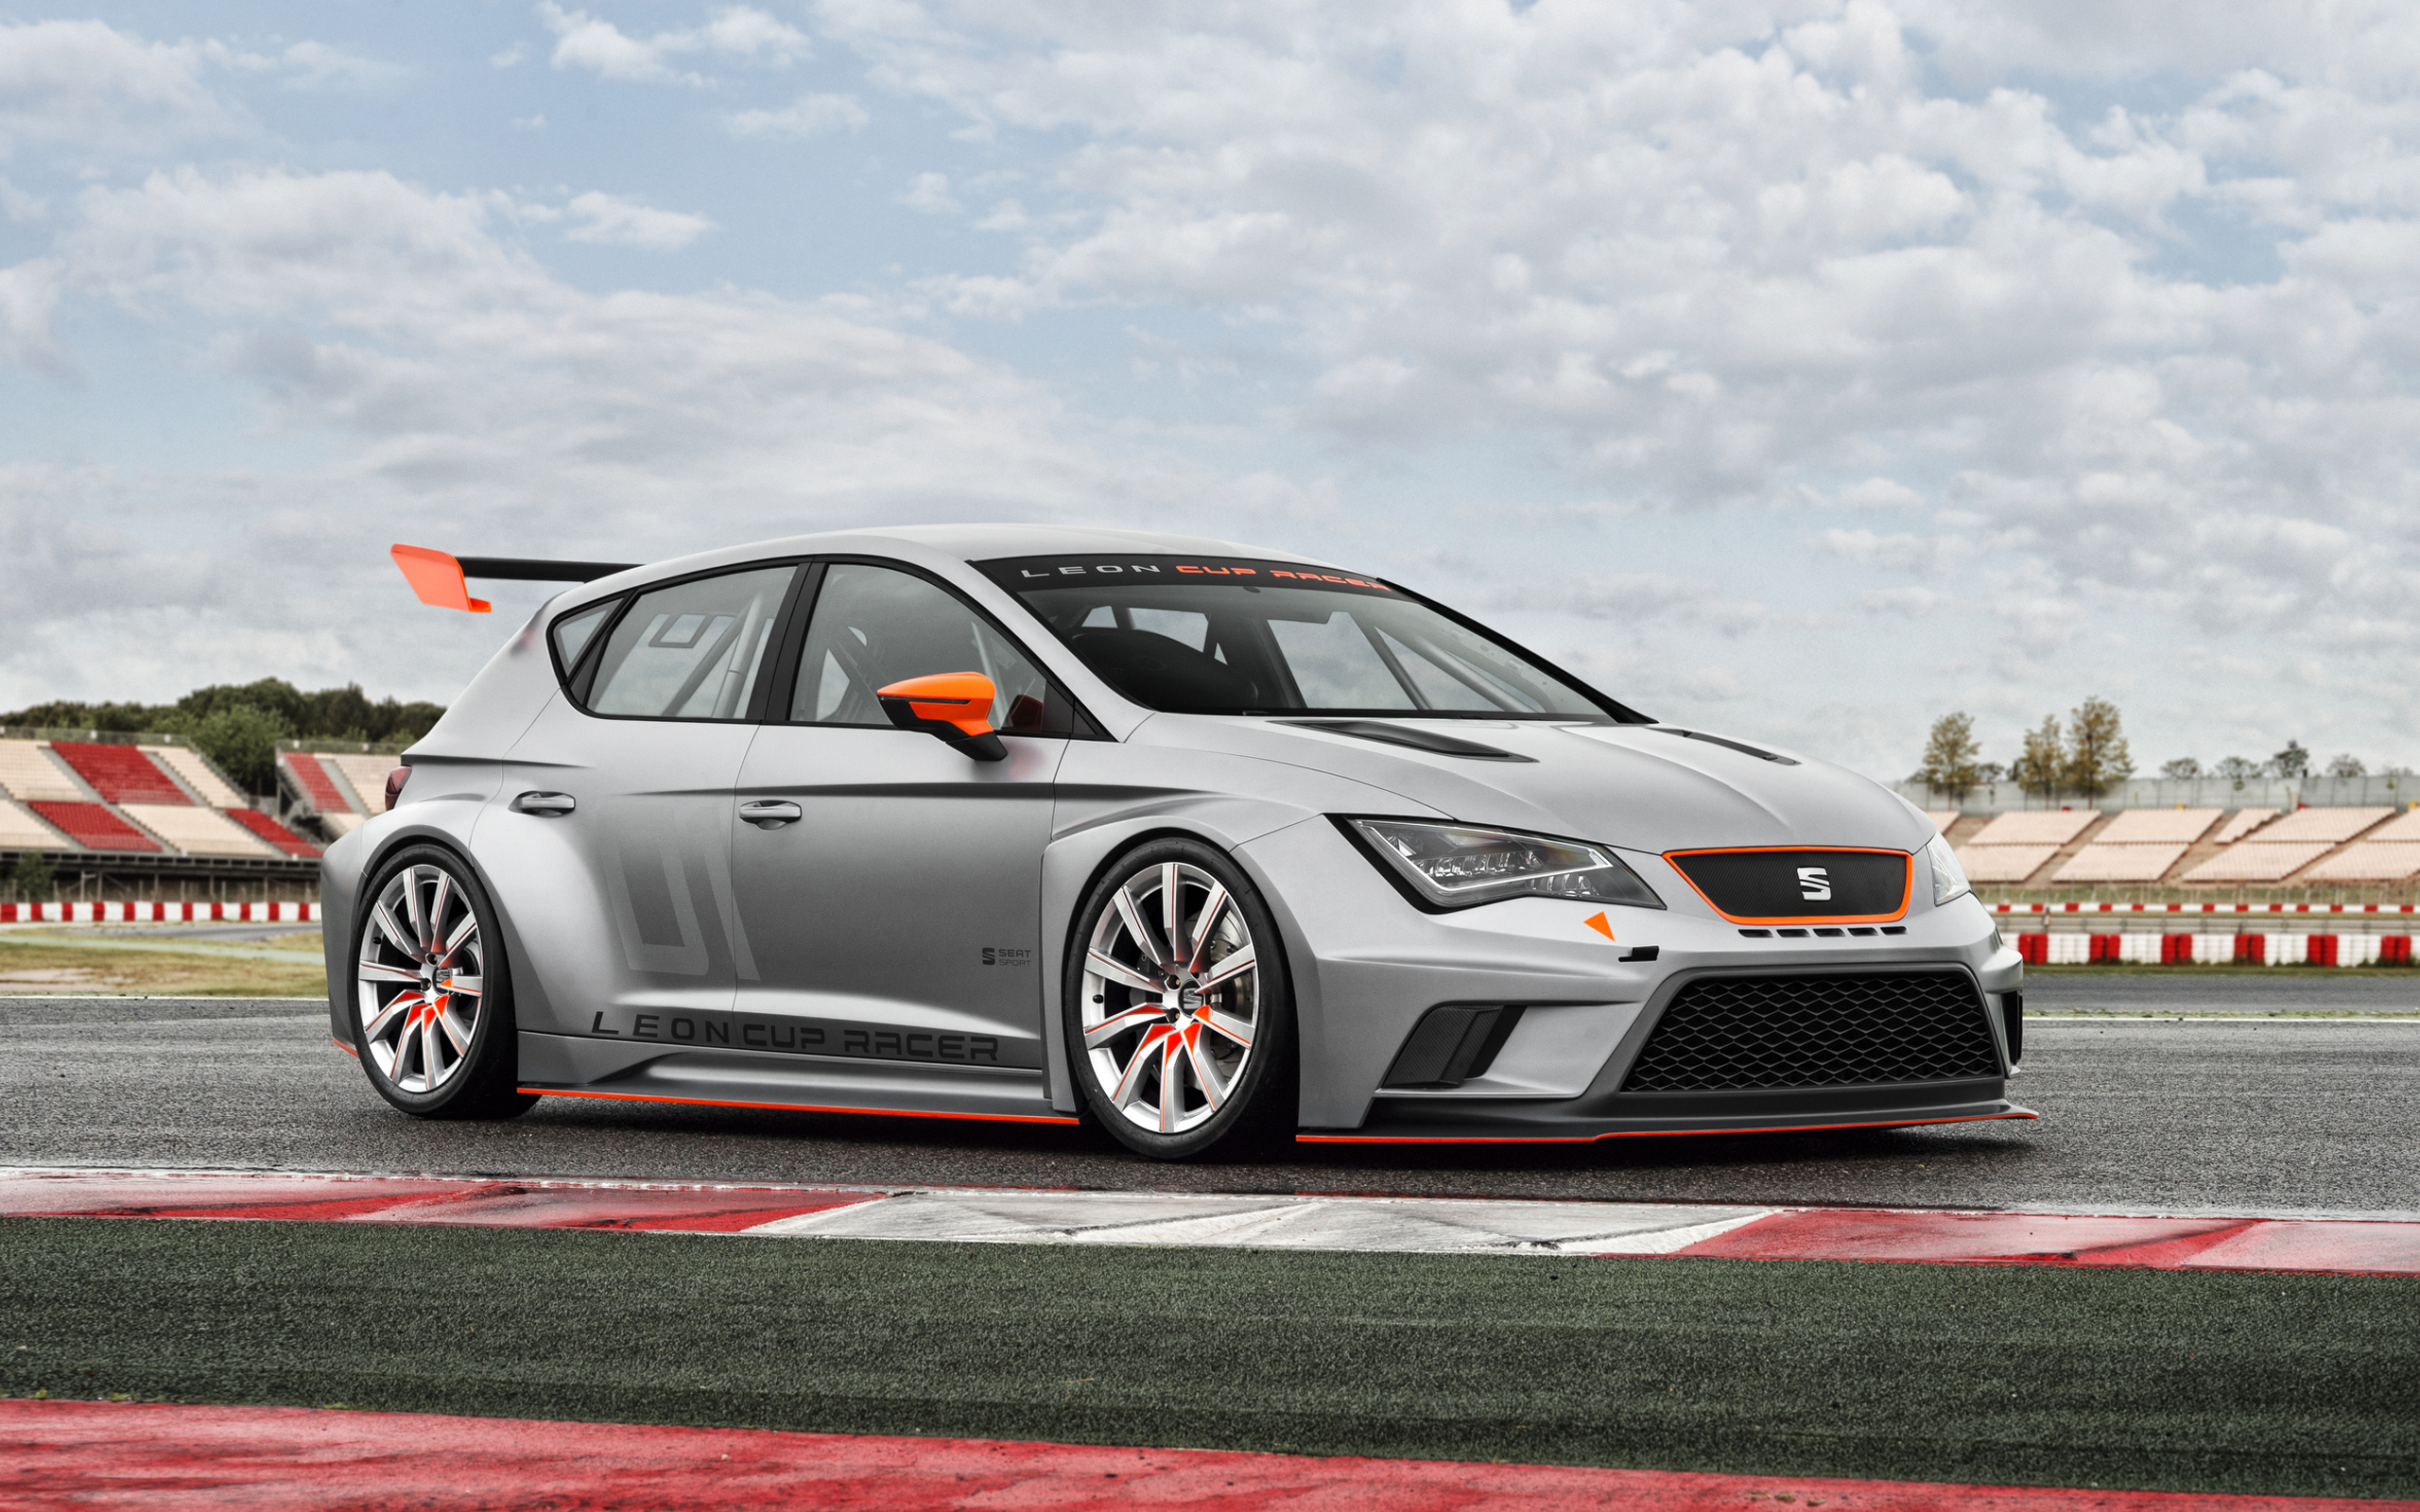 Seat Leгіn Cup Racer Concept Wallpapers